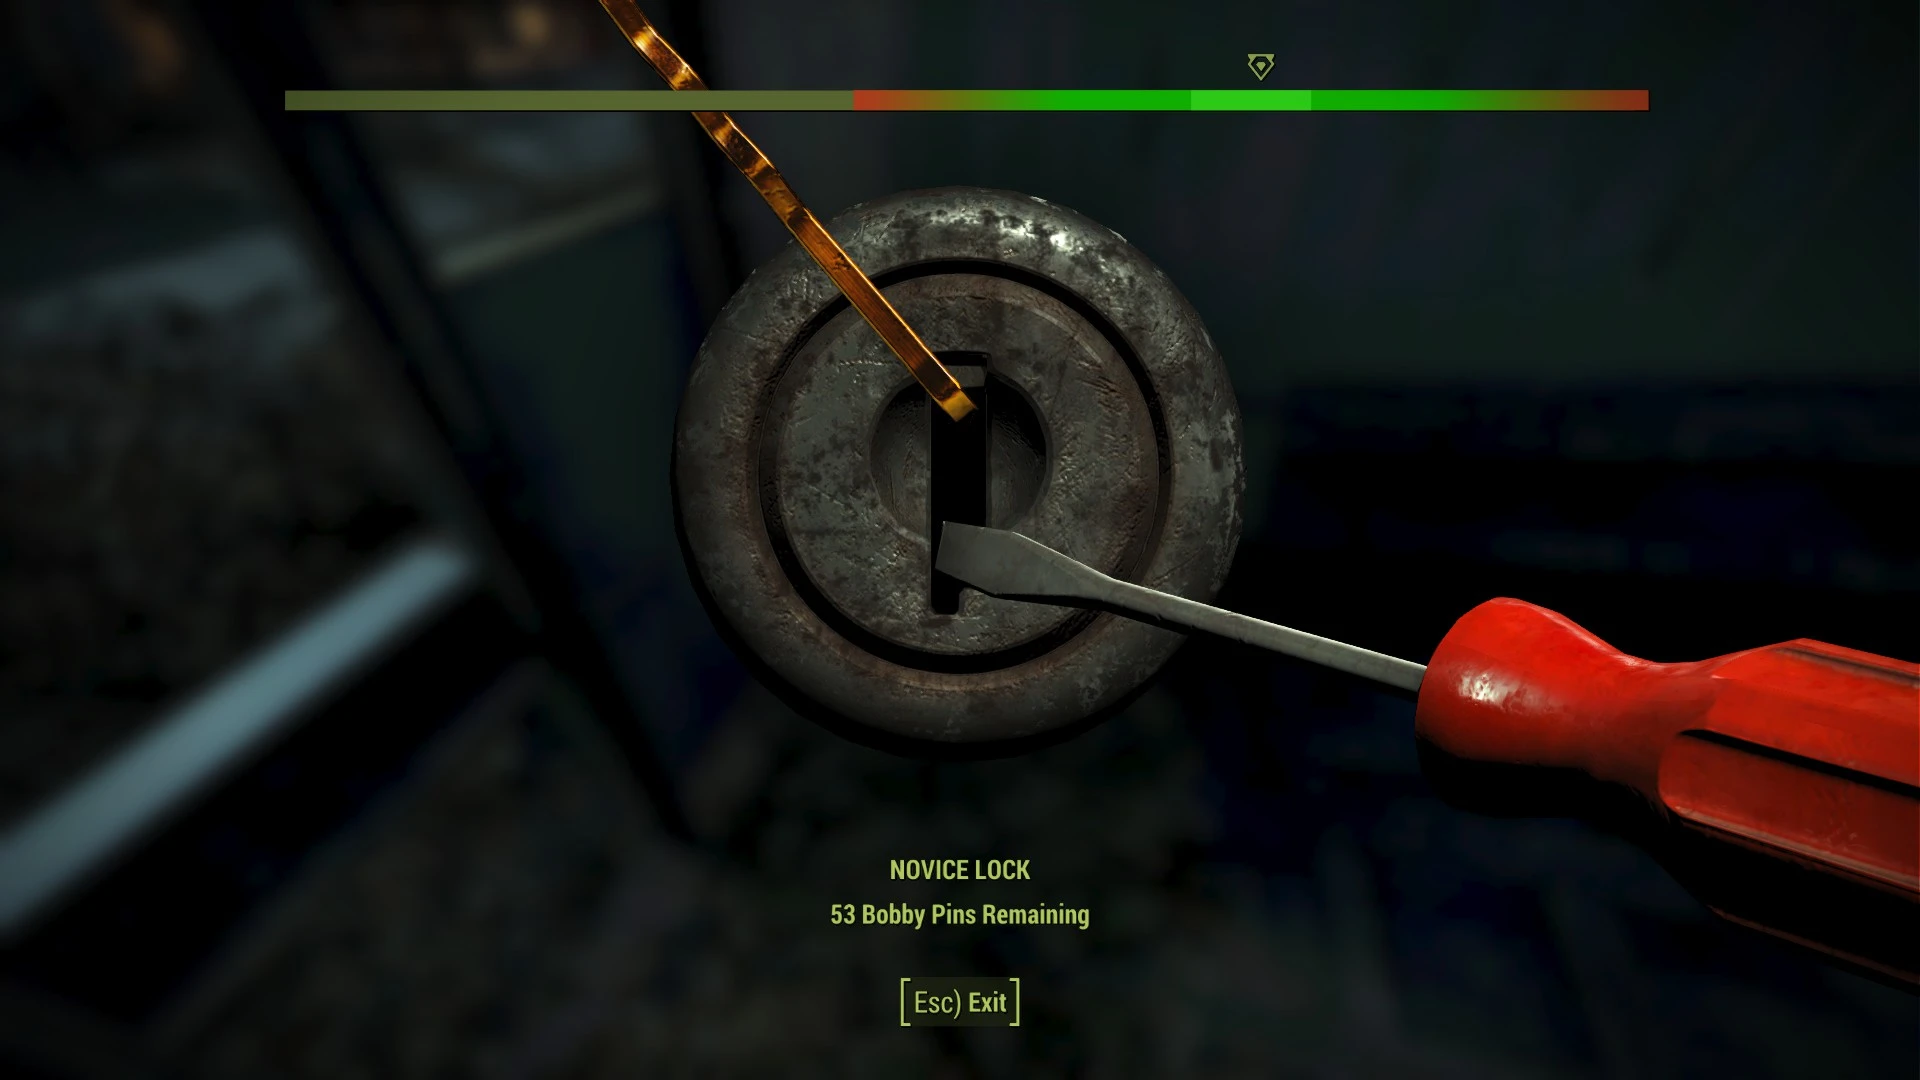 enable mods fallout 4